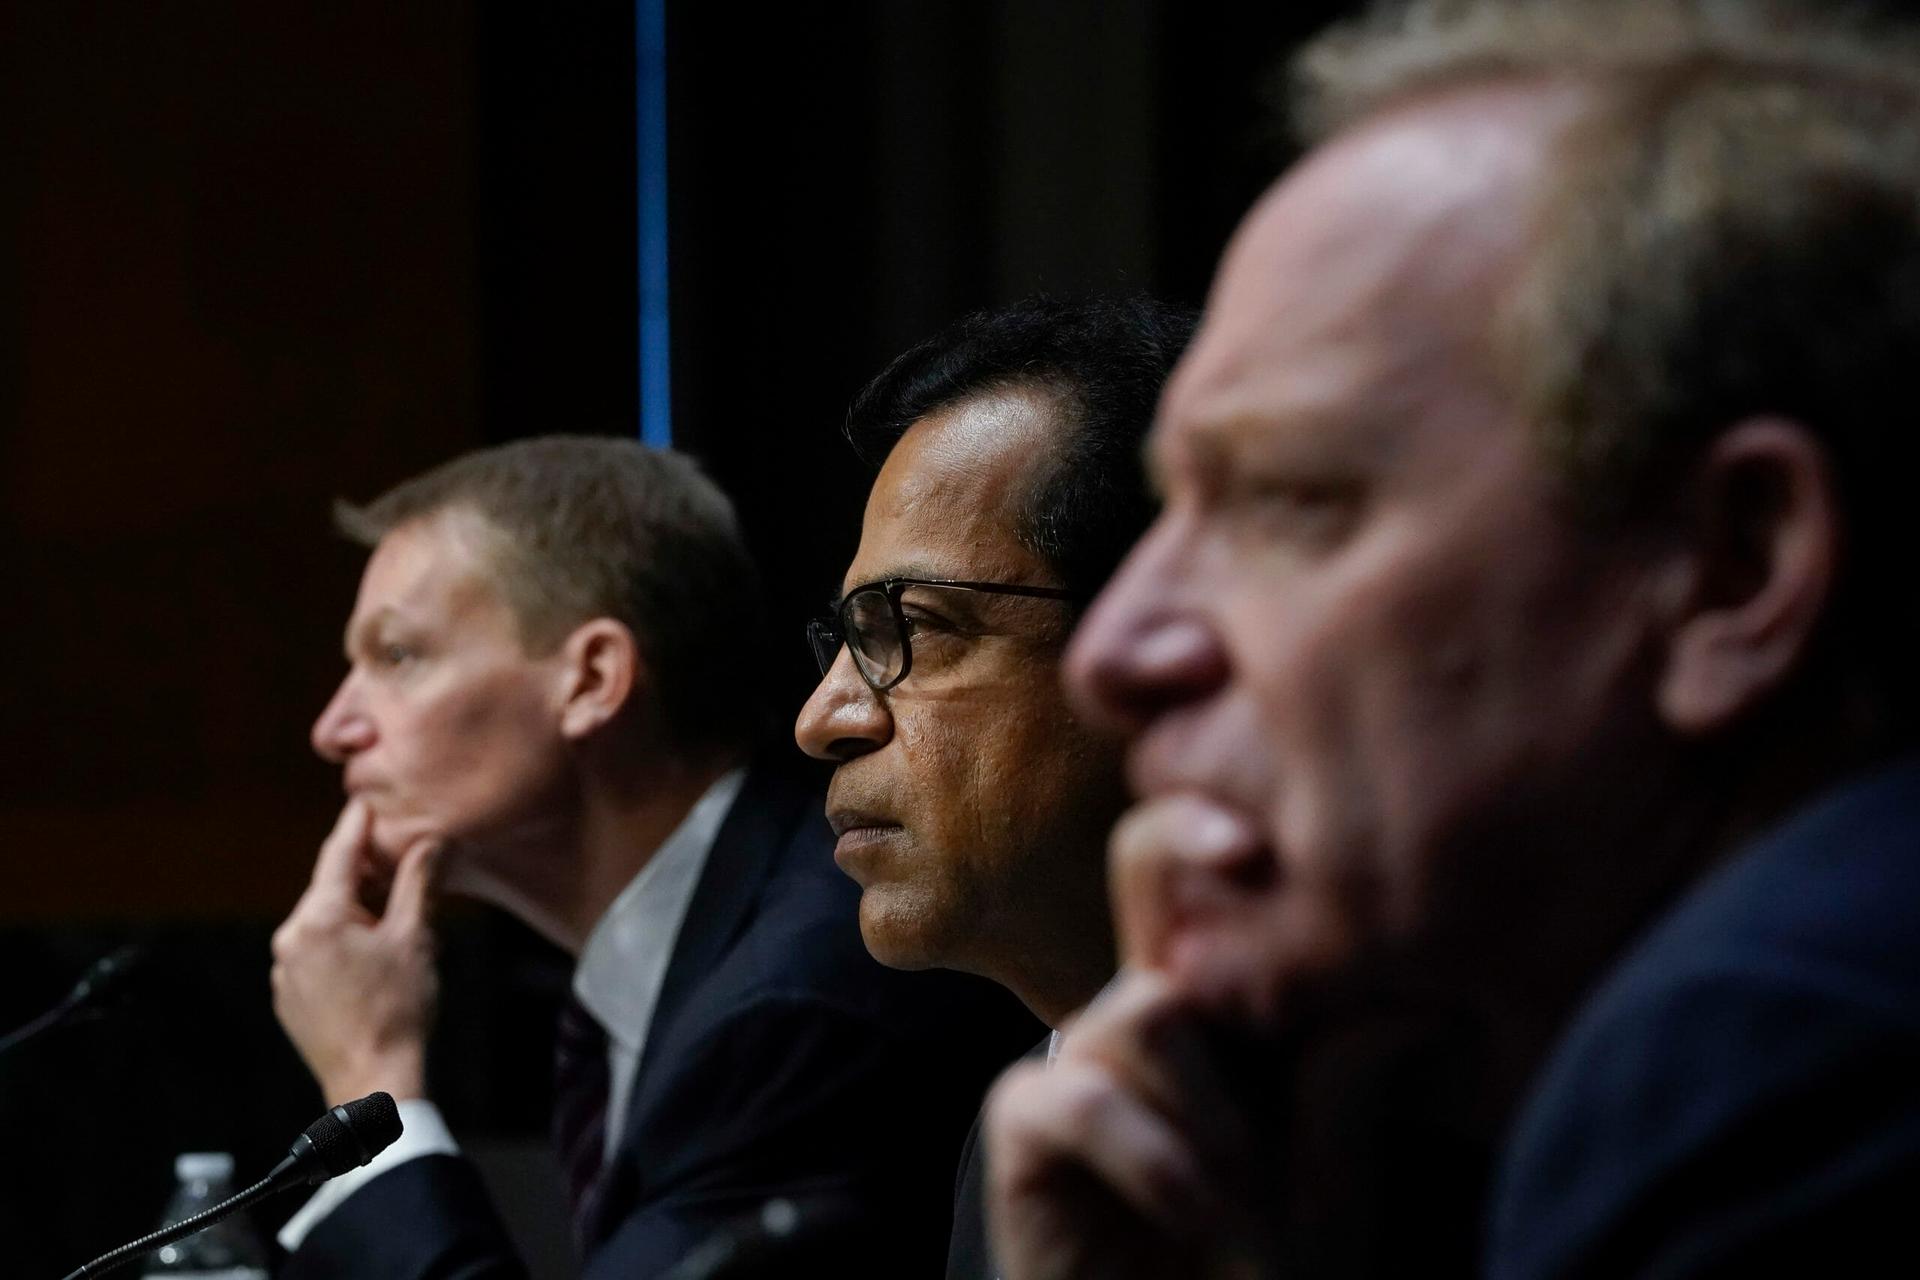 WASHINGTON, DC &#8211; FEBRUARY 23: (L-R) FireEye CEO Kevin Mandia, SolarWinds CEO Sudhakar Ramakrishna and Microsoft President Brad Smith testify during a Senate Intelligence Committee hearing on Capitol Hill on February 23, 2021 in Washington, DC. The hearing focused on the 2020 cyberattack that resulted in a series of data breaches within severa...